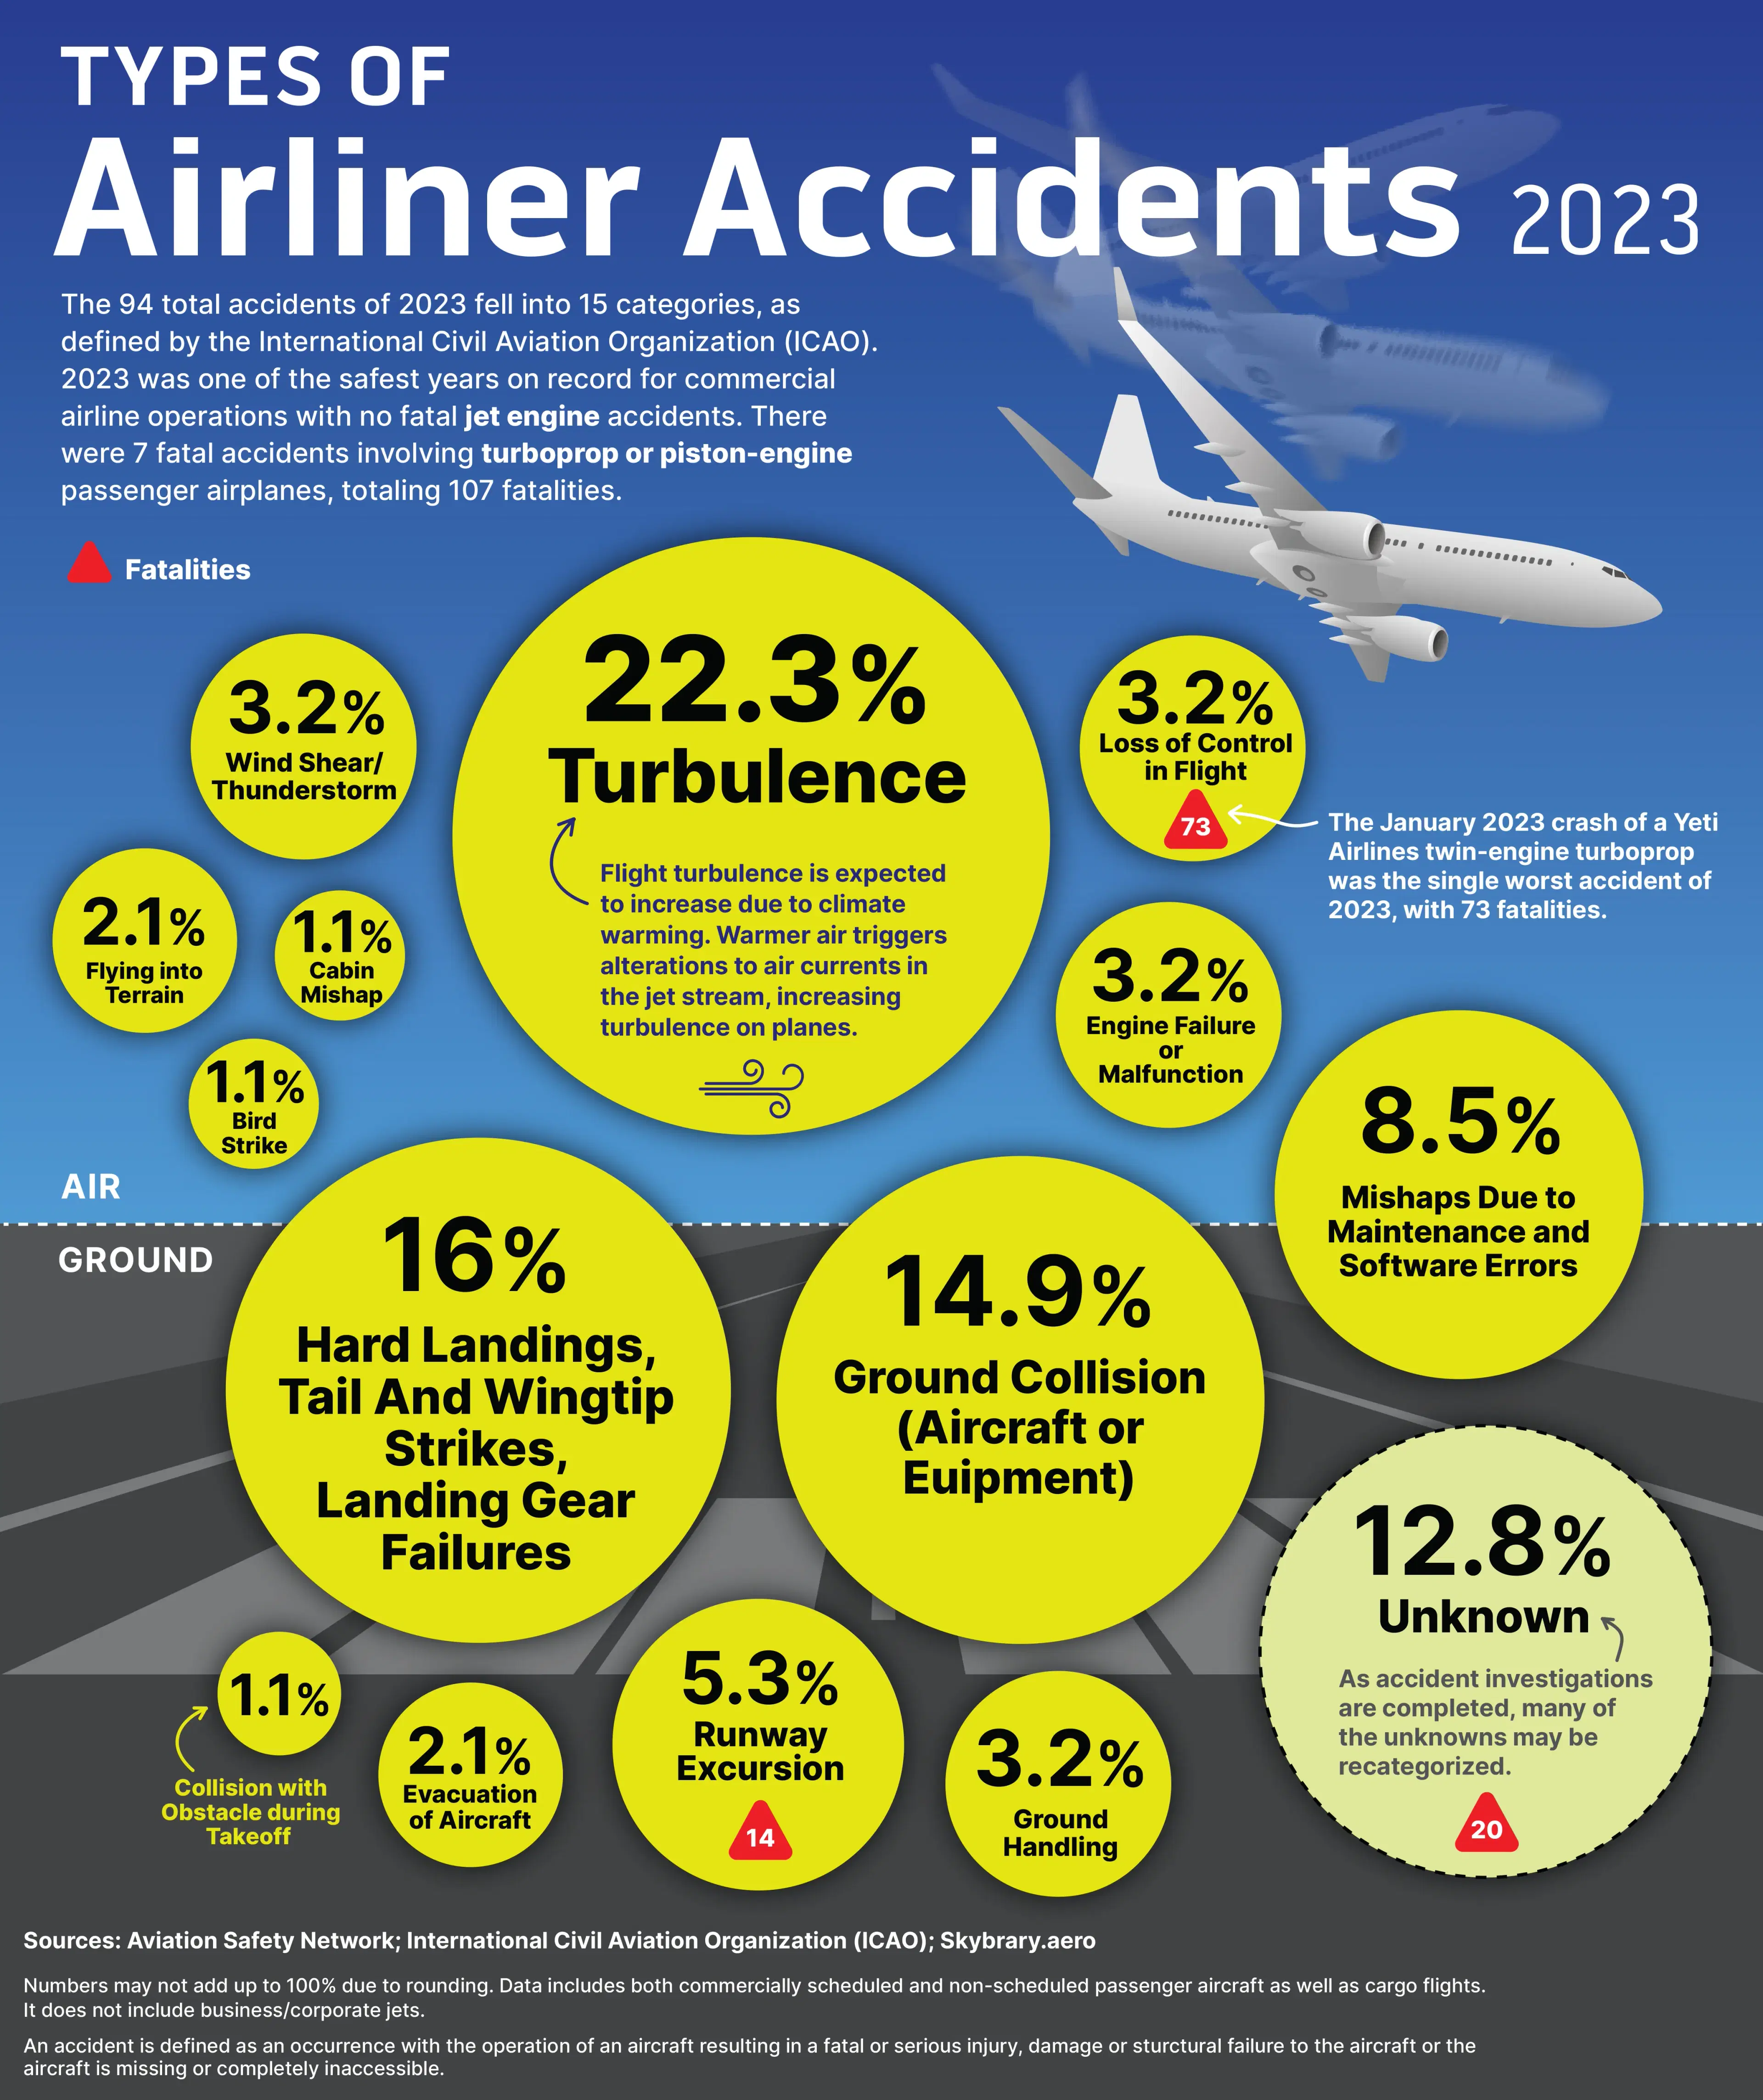 Types of Airliner Accidents in 2023